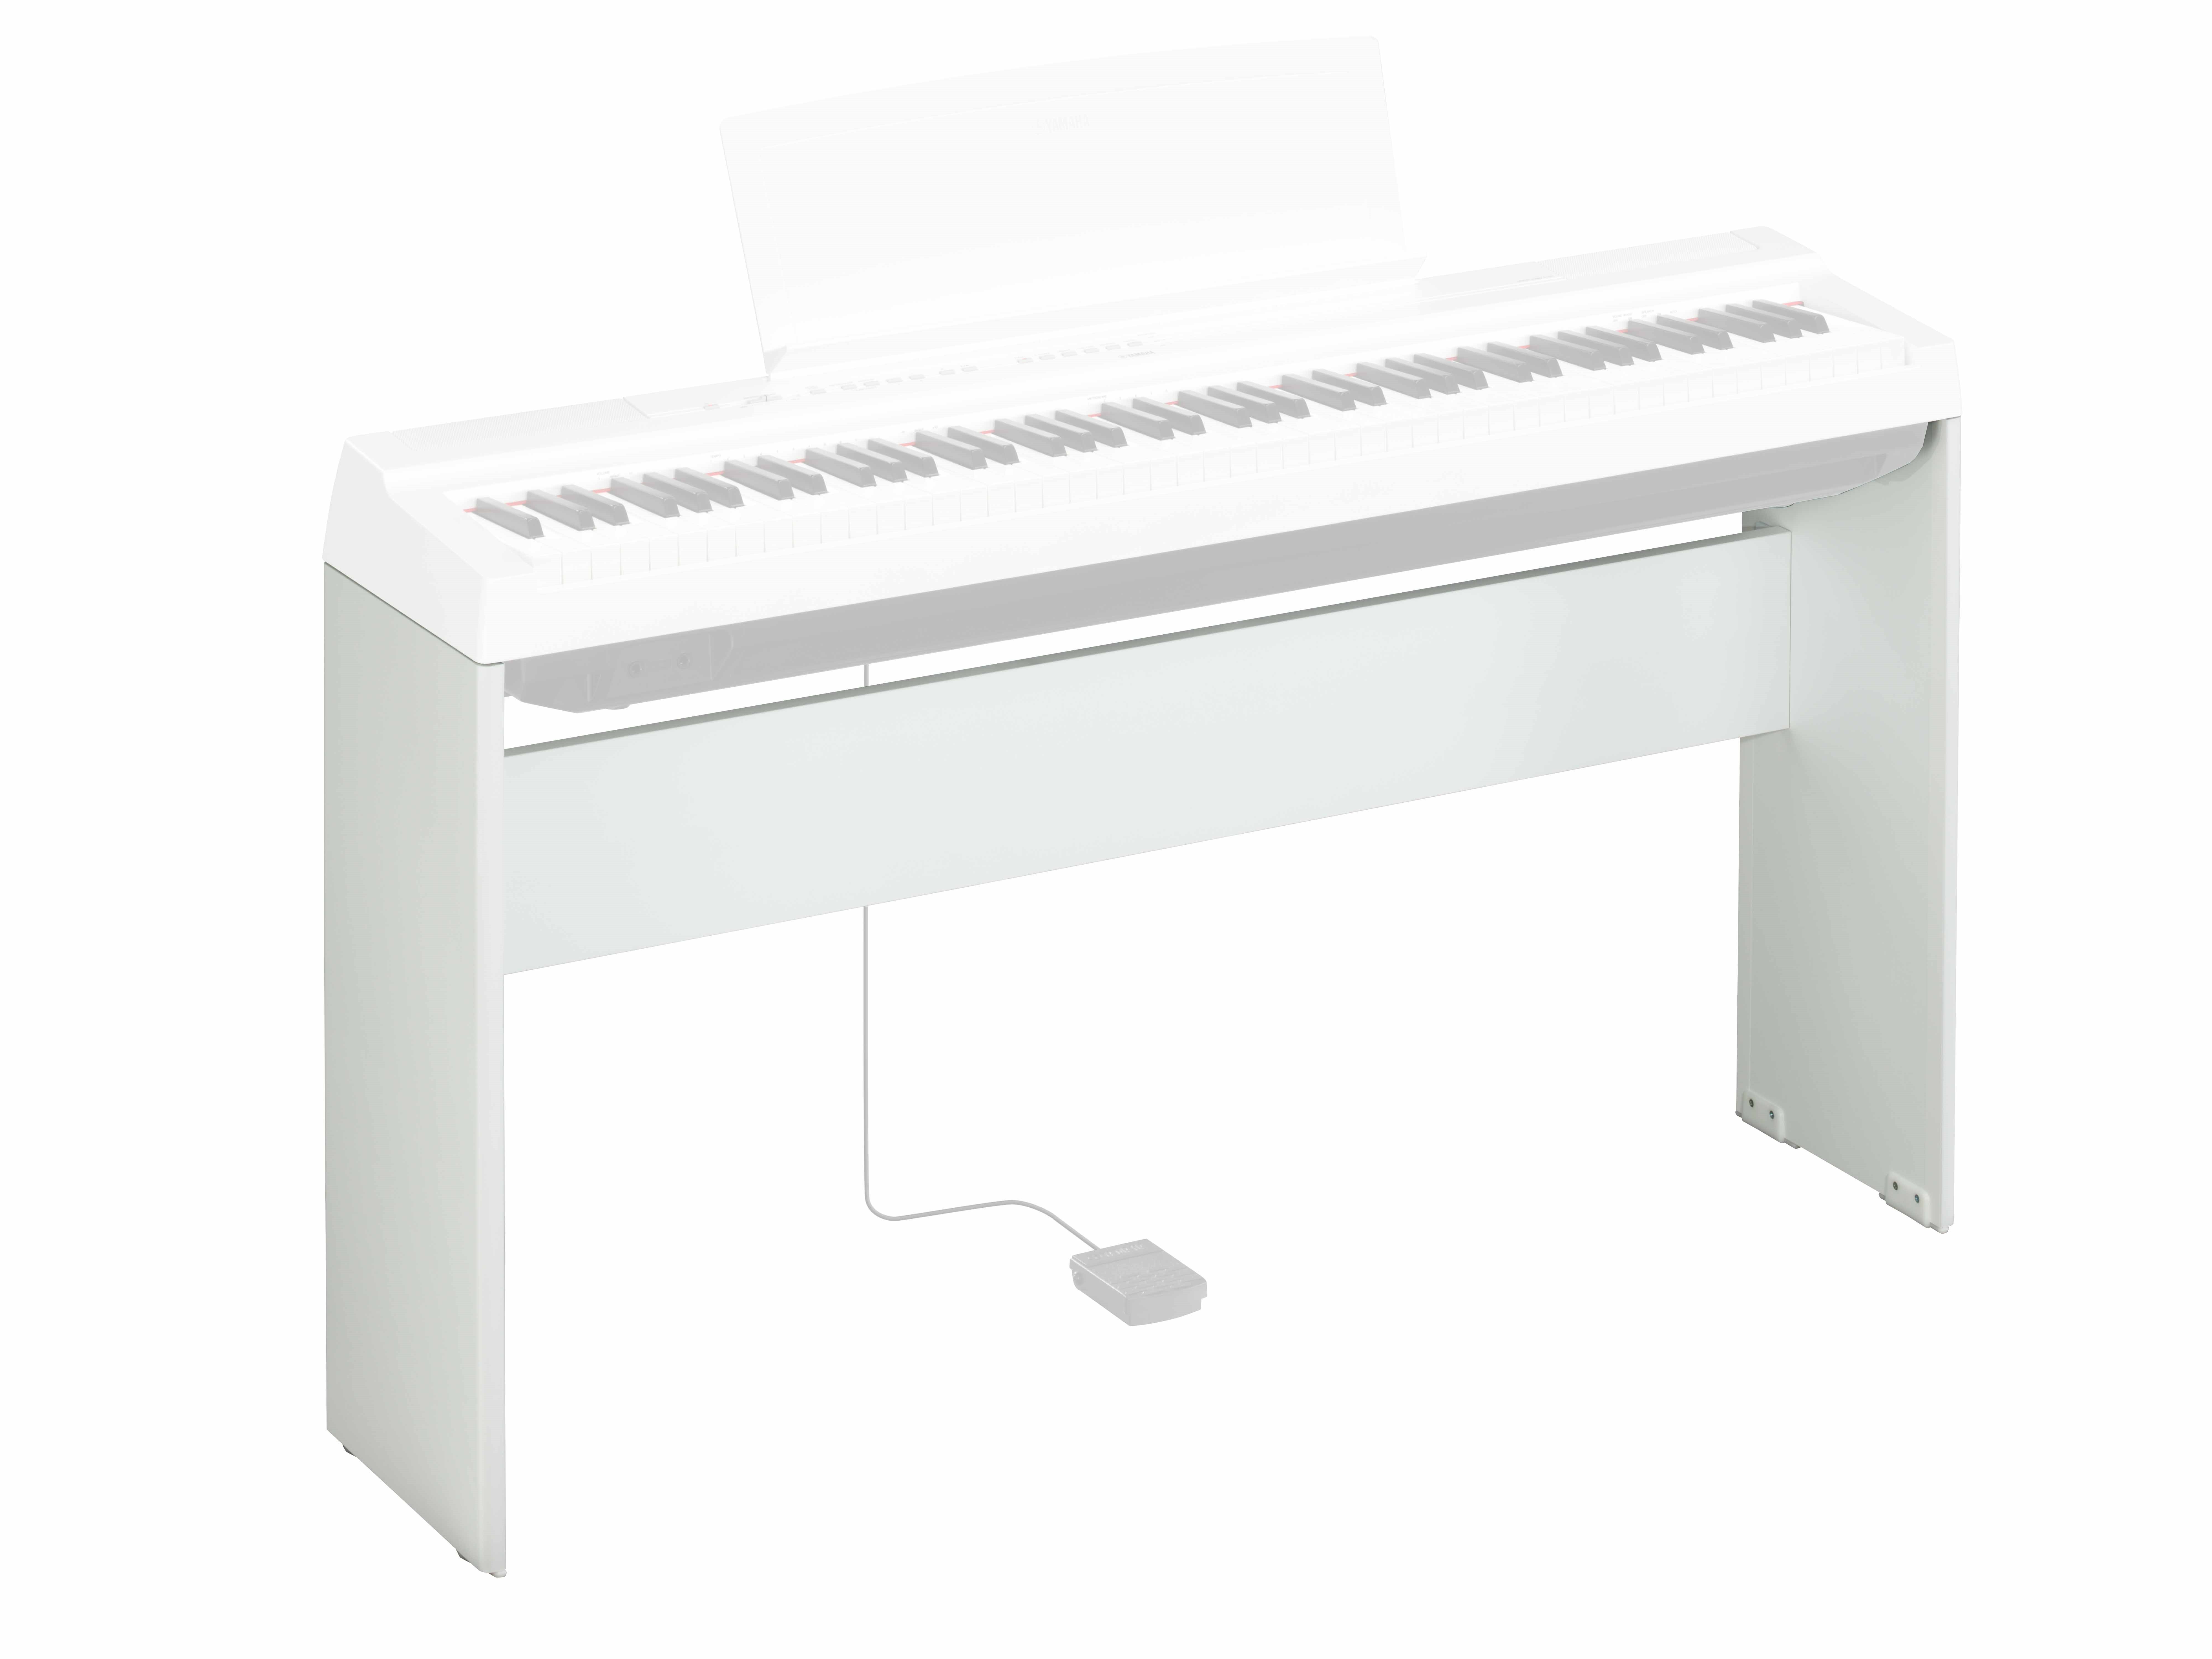 L-125 - Overview - Accessories - Pianos - Musical Instruments